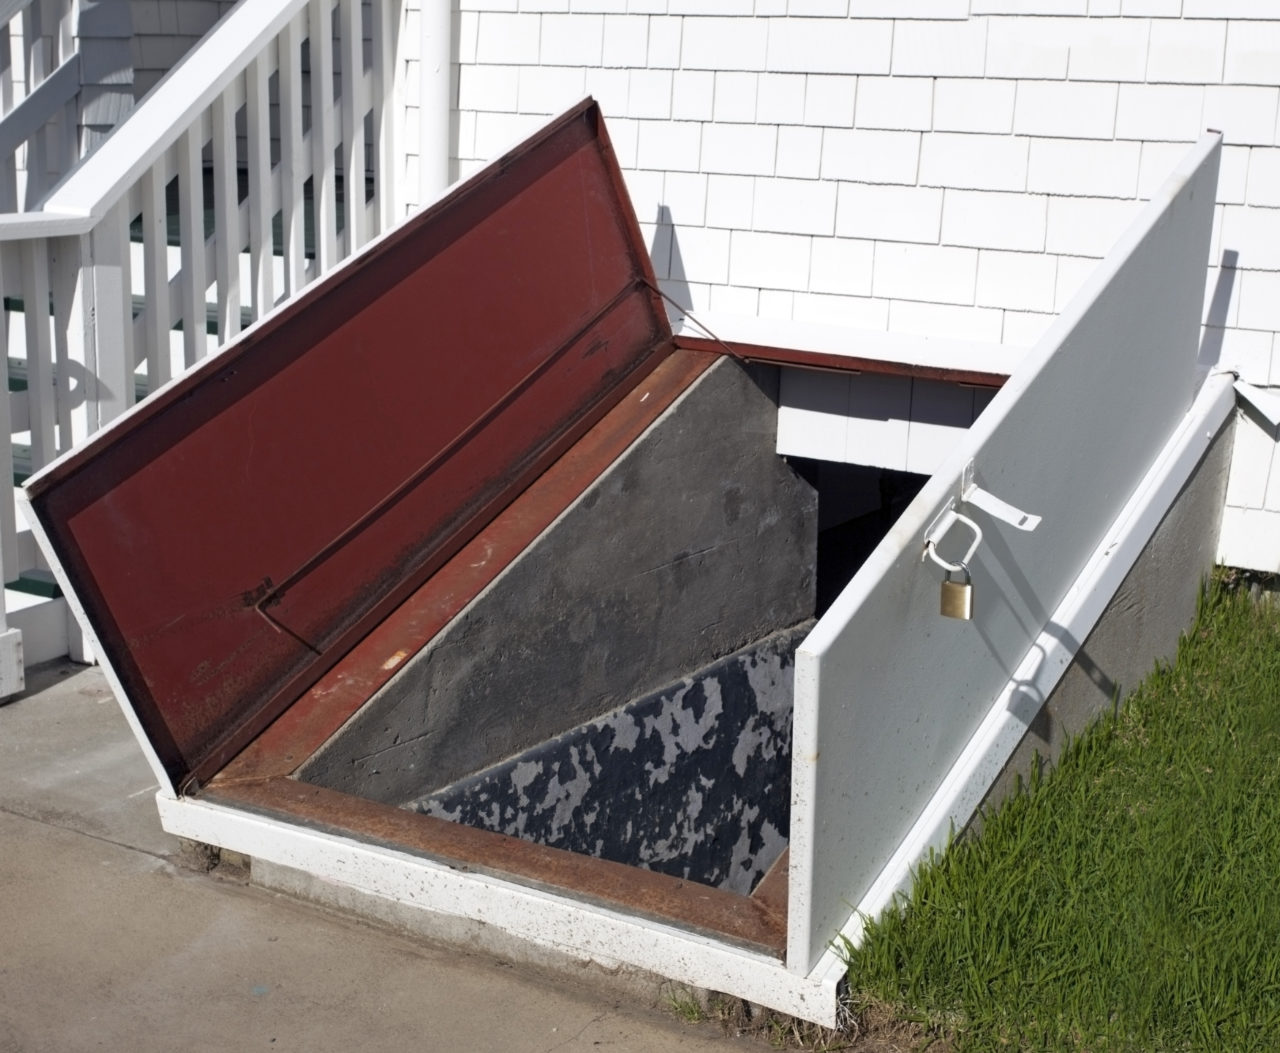 https://www.rpsmetalroofing.com/wp-content/uploads/2022/10/shelter-in-place-storm-shelter-1280x1053.jpg